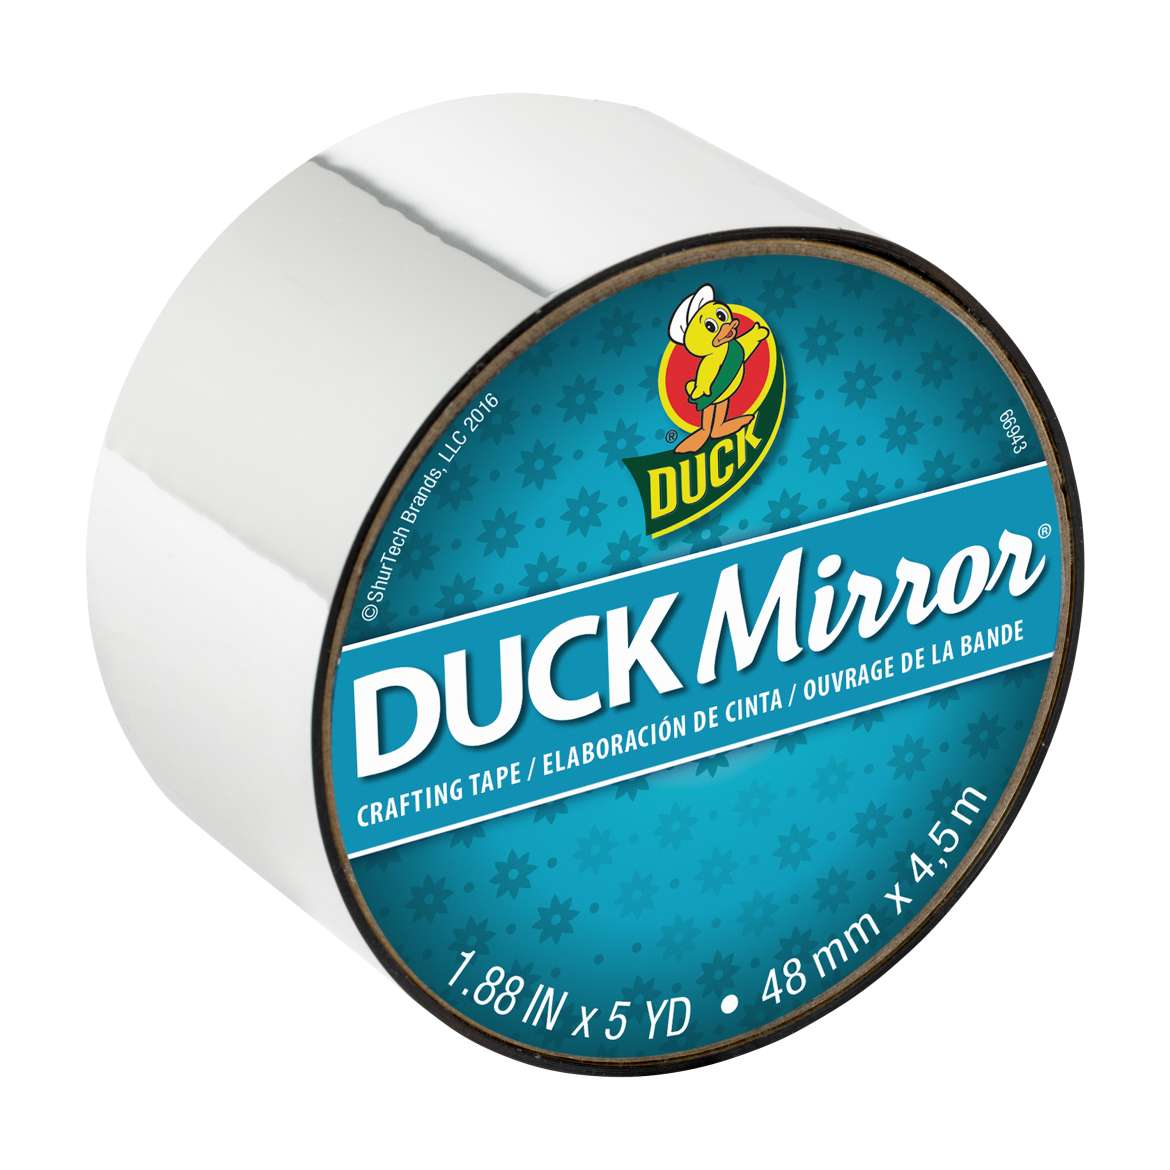 Duck Mirror® Crafting Tape - Silver, 1.88 in. x 5 yd.